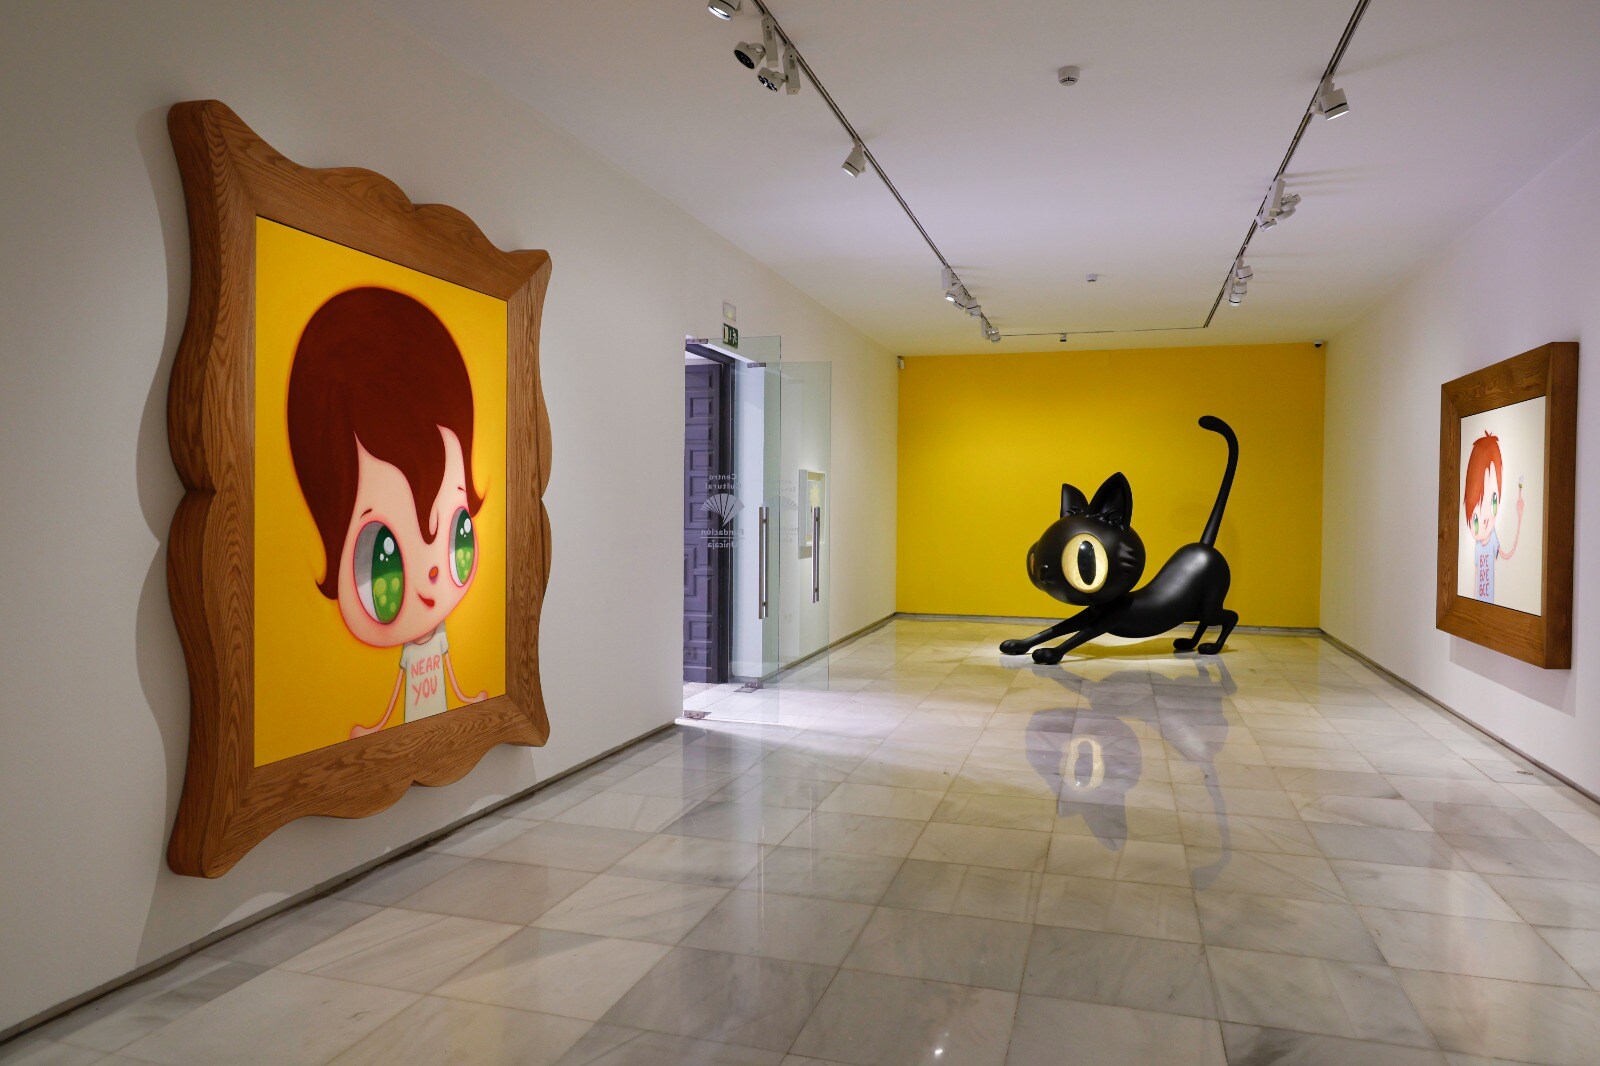 The ambitious exhibition of Javier Calleja at Malaga&#039;s Centro Fundación Unicaja, in pictures